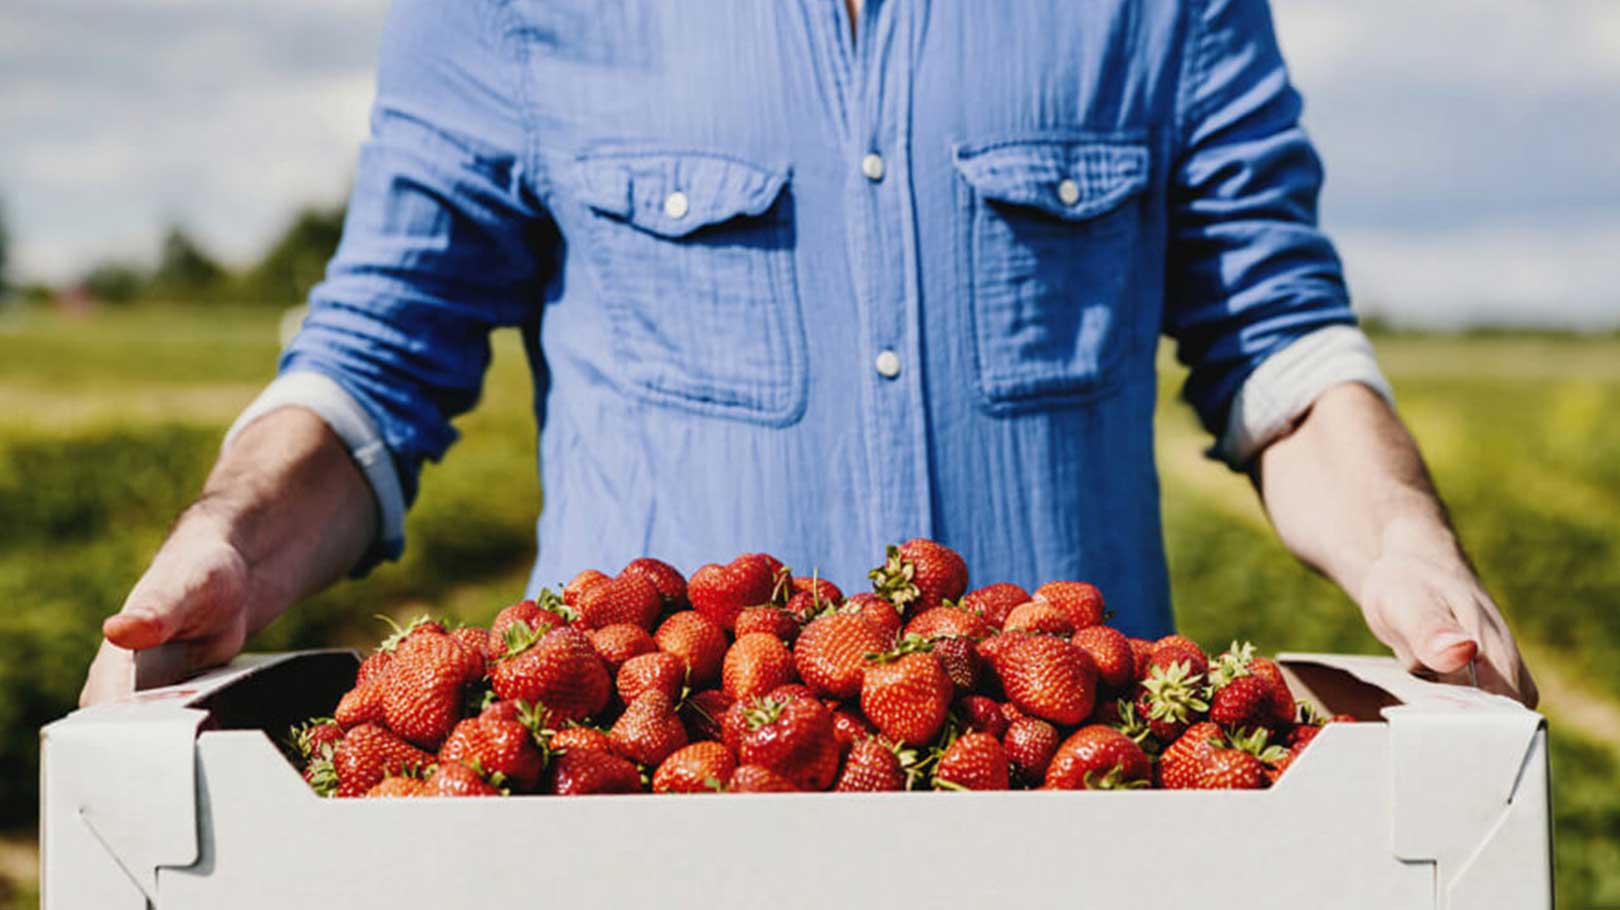 Farmer carrying a box of strawberries they've harvested